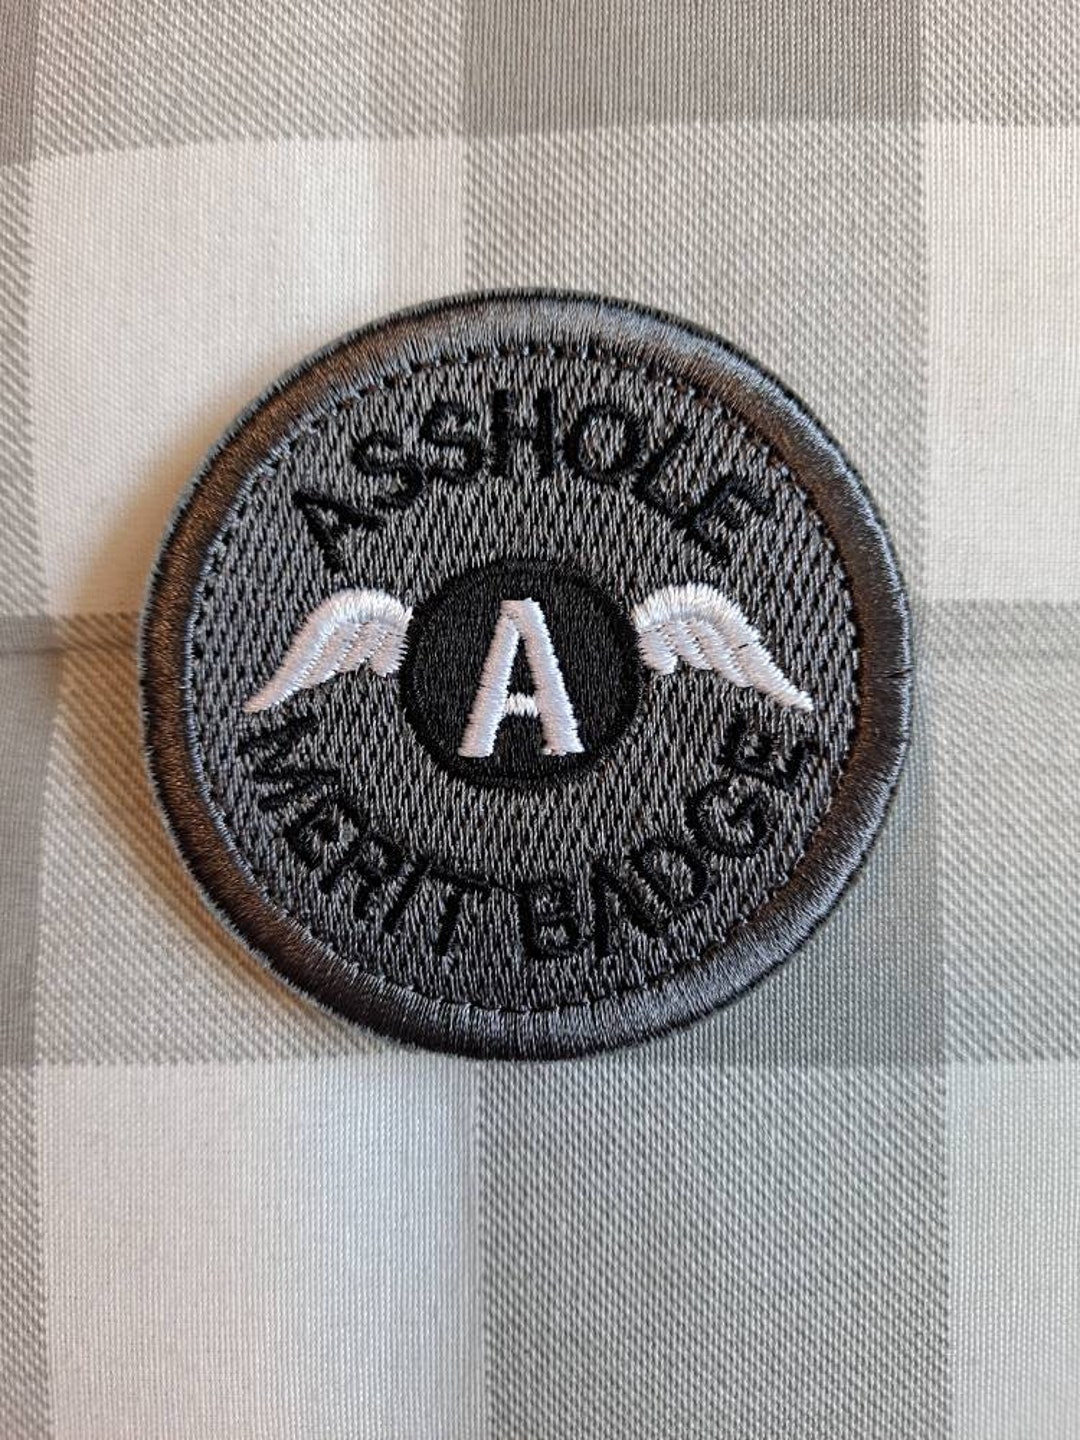 Asshole Merit Badge Hook and Loop Patch - Etsy